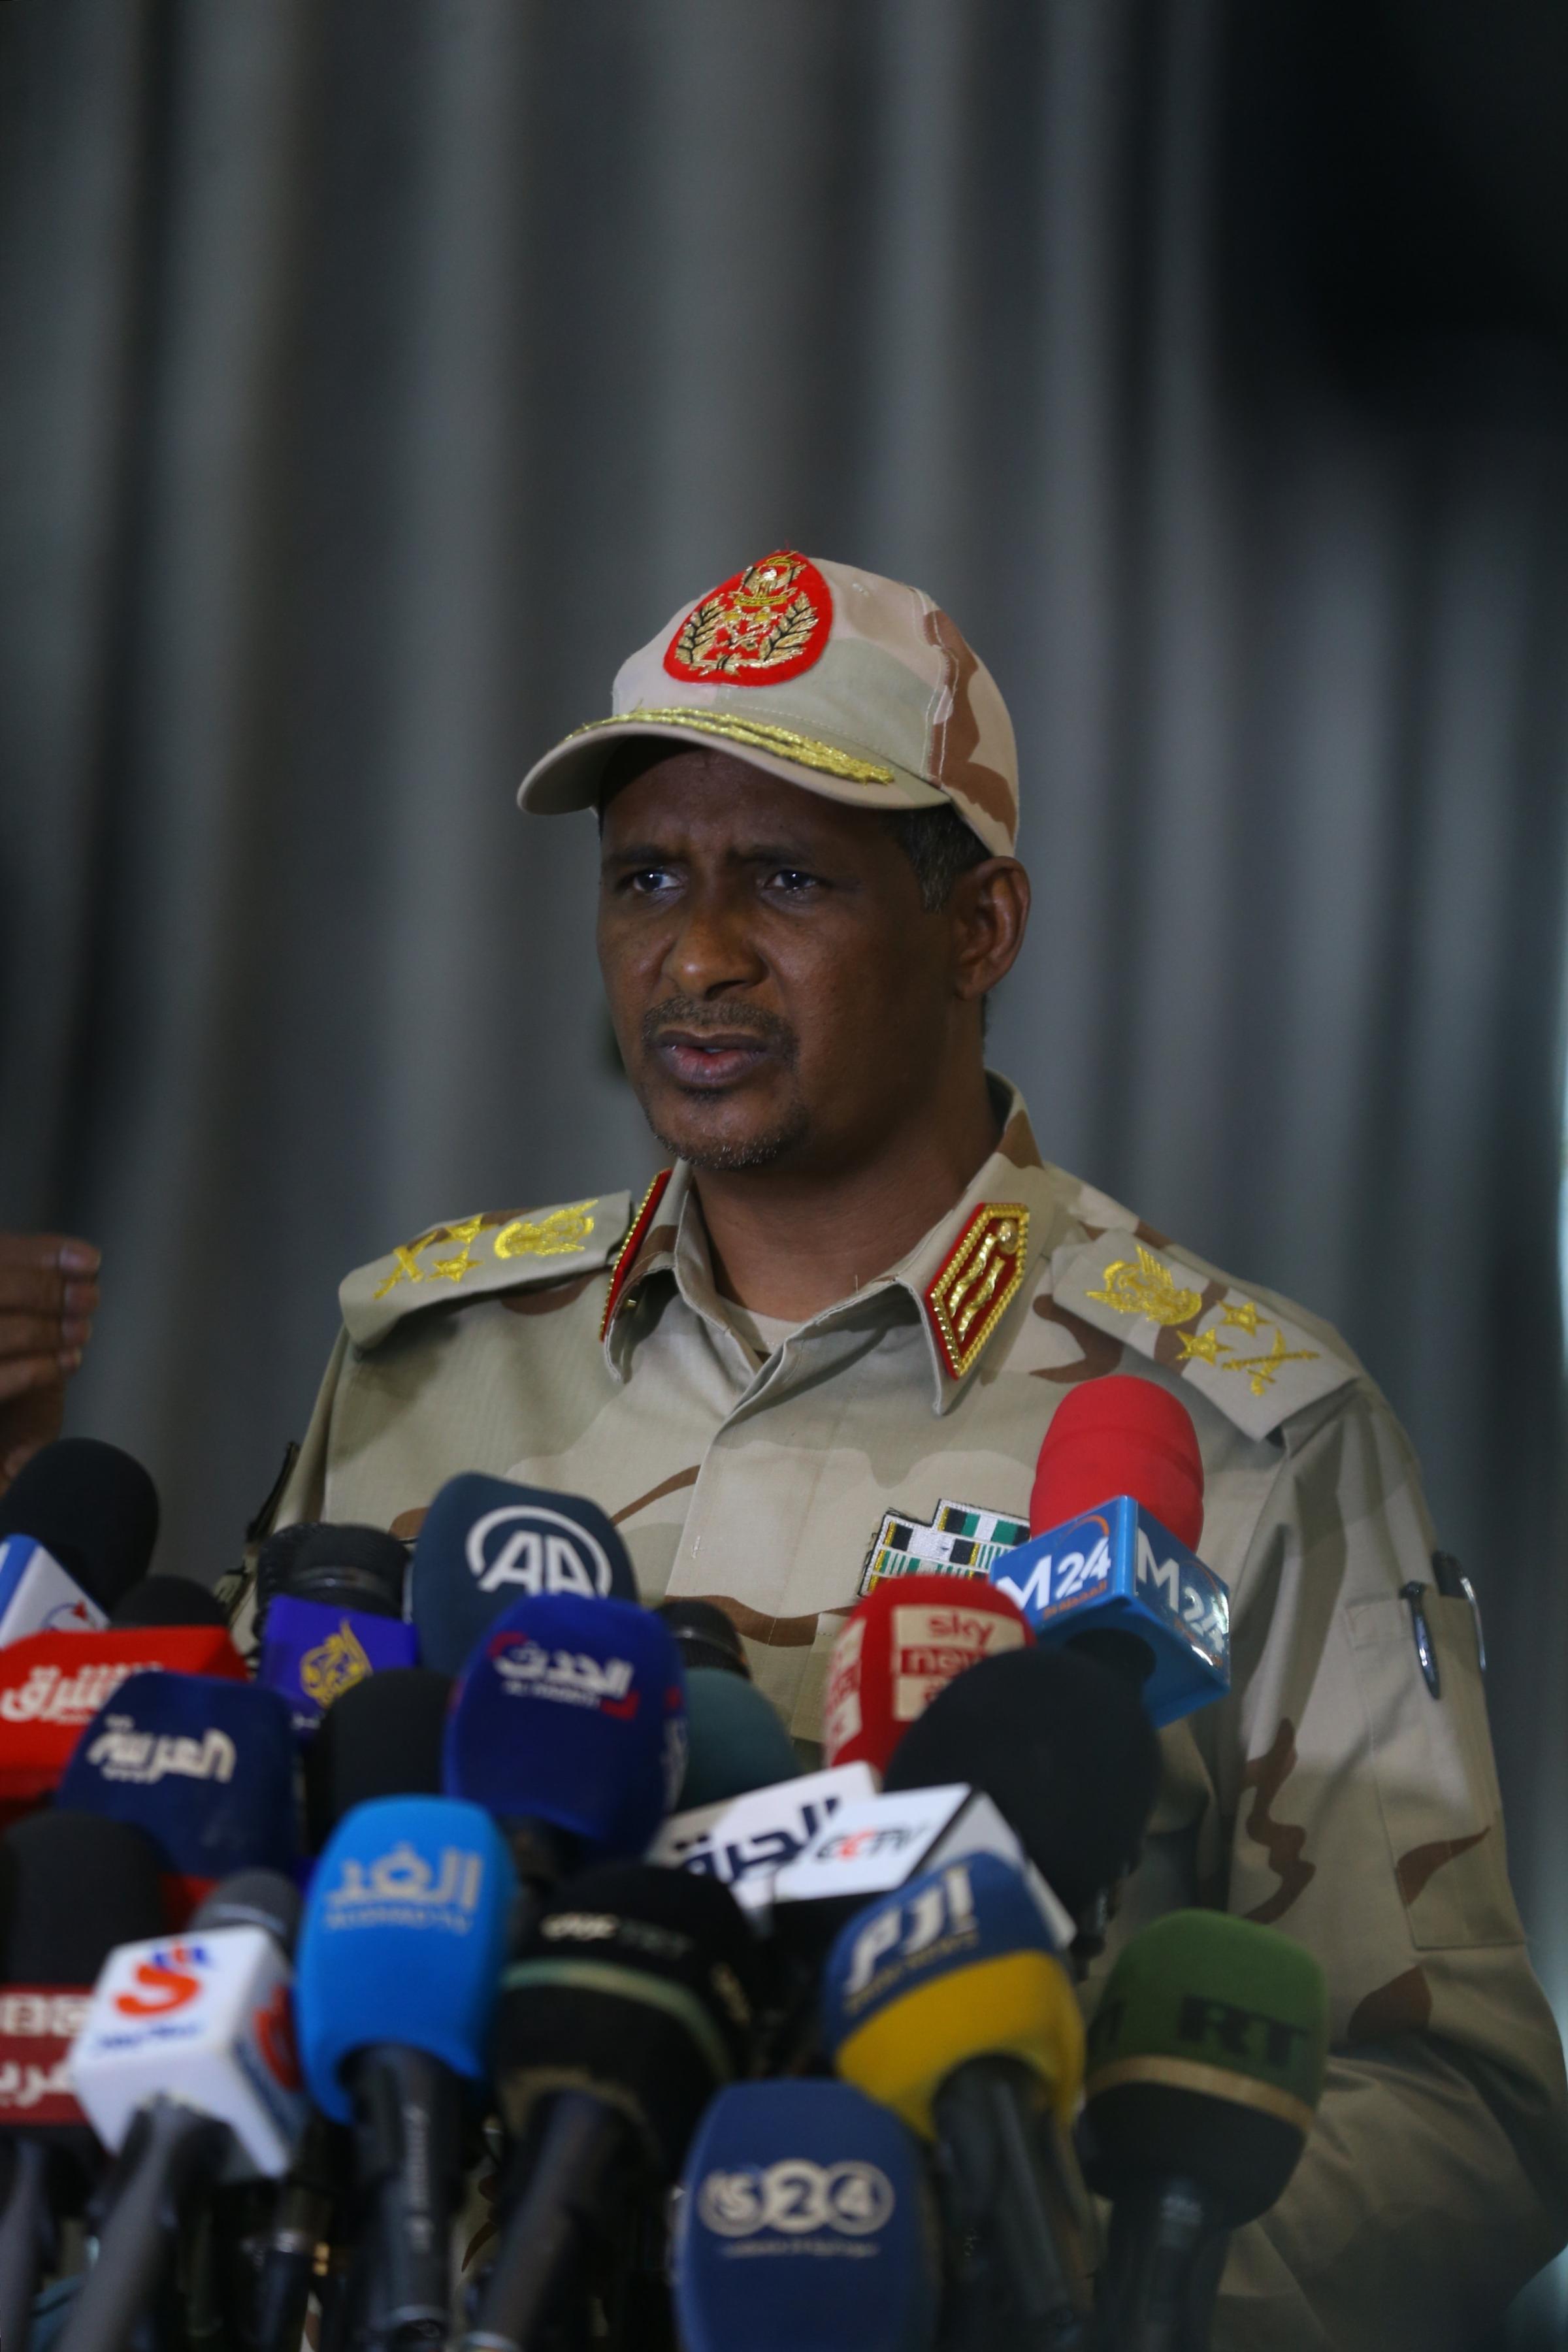 KHARTOUM, SUDAN - AUGUST 10: Mohamed Hamdan Dagalo, Sudanese Deputy Chairman of the Transitional Sovereignty Council, talks during the press conference in Khartoum, Sudan on August 10, 2022. (Photo by Mahmoud Hjaj/Anadolu Agency via Getty Images).